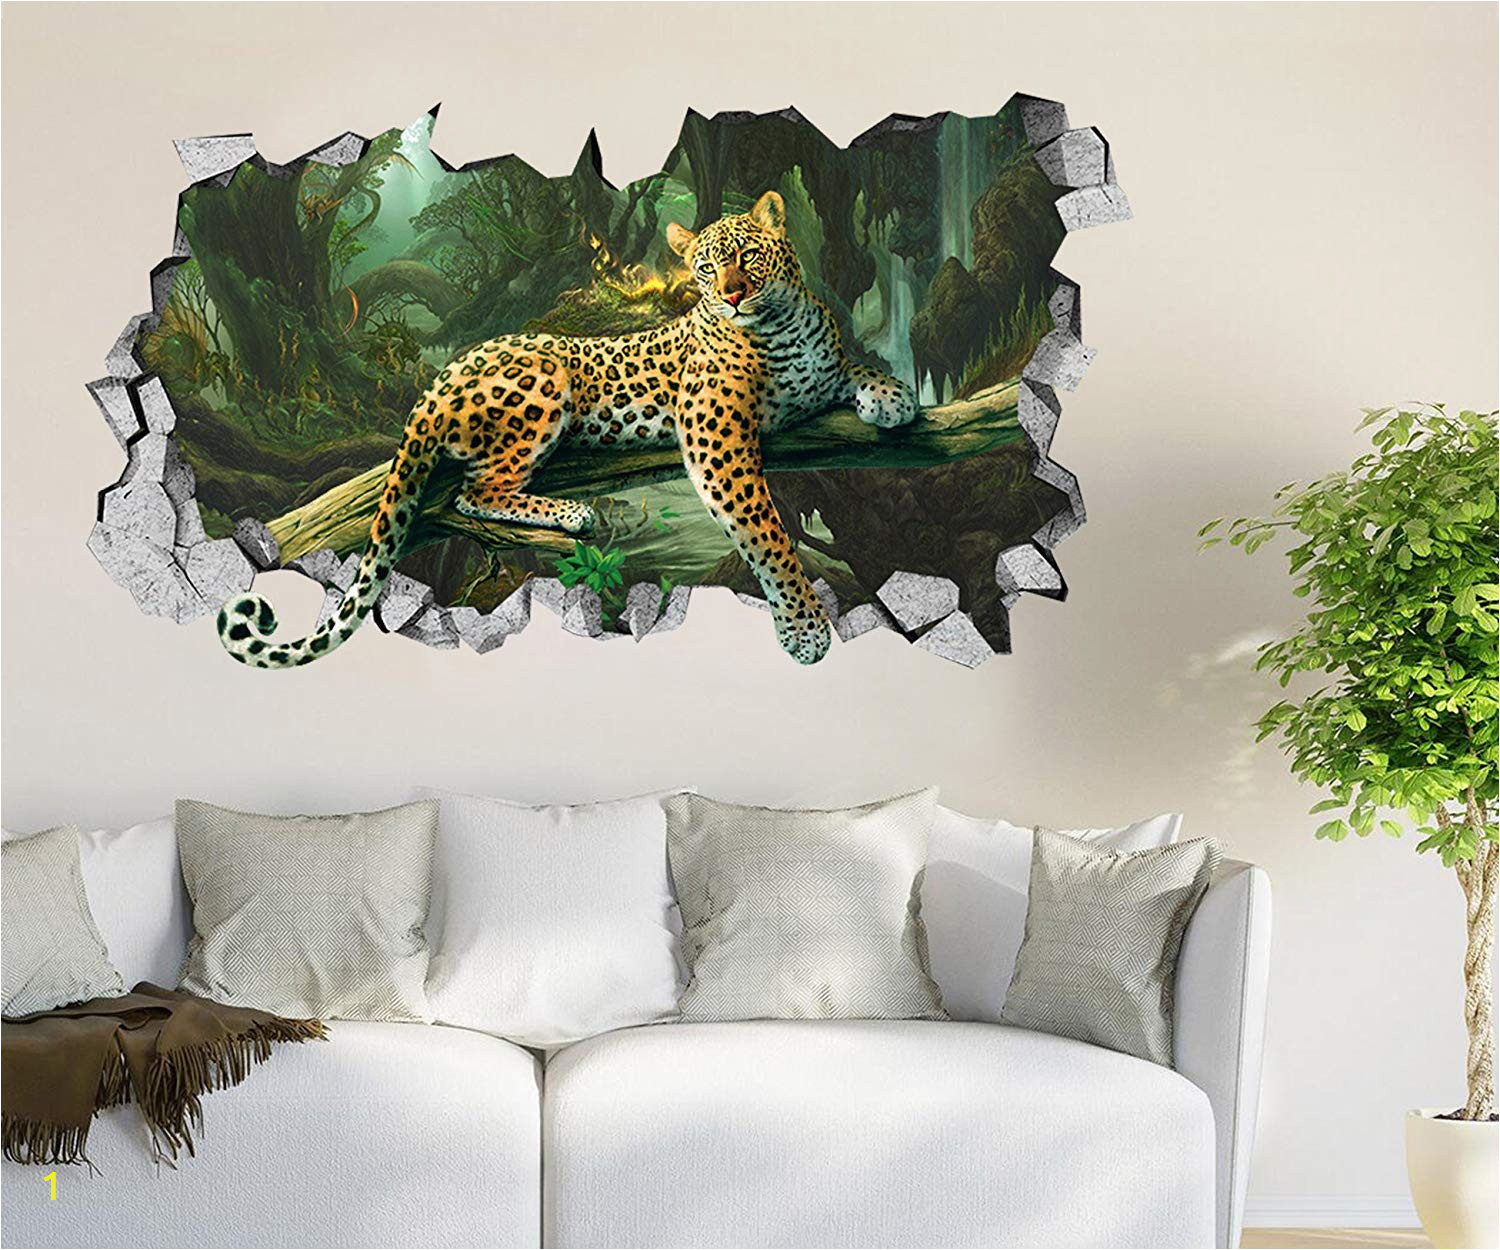 Giant Coloring Wall Murals 3d forest Leopard Roar 44 Wall Murals Wall Stickers Decal